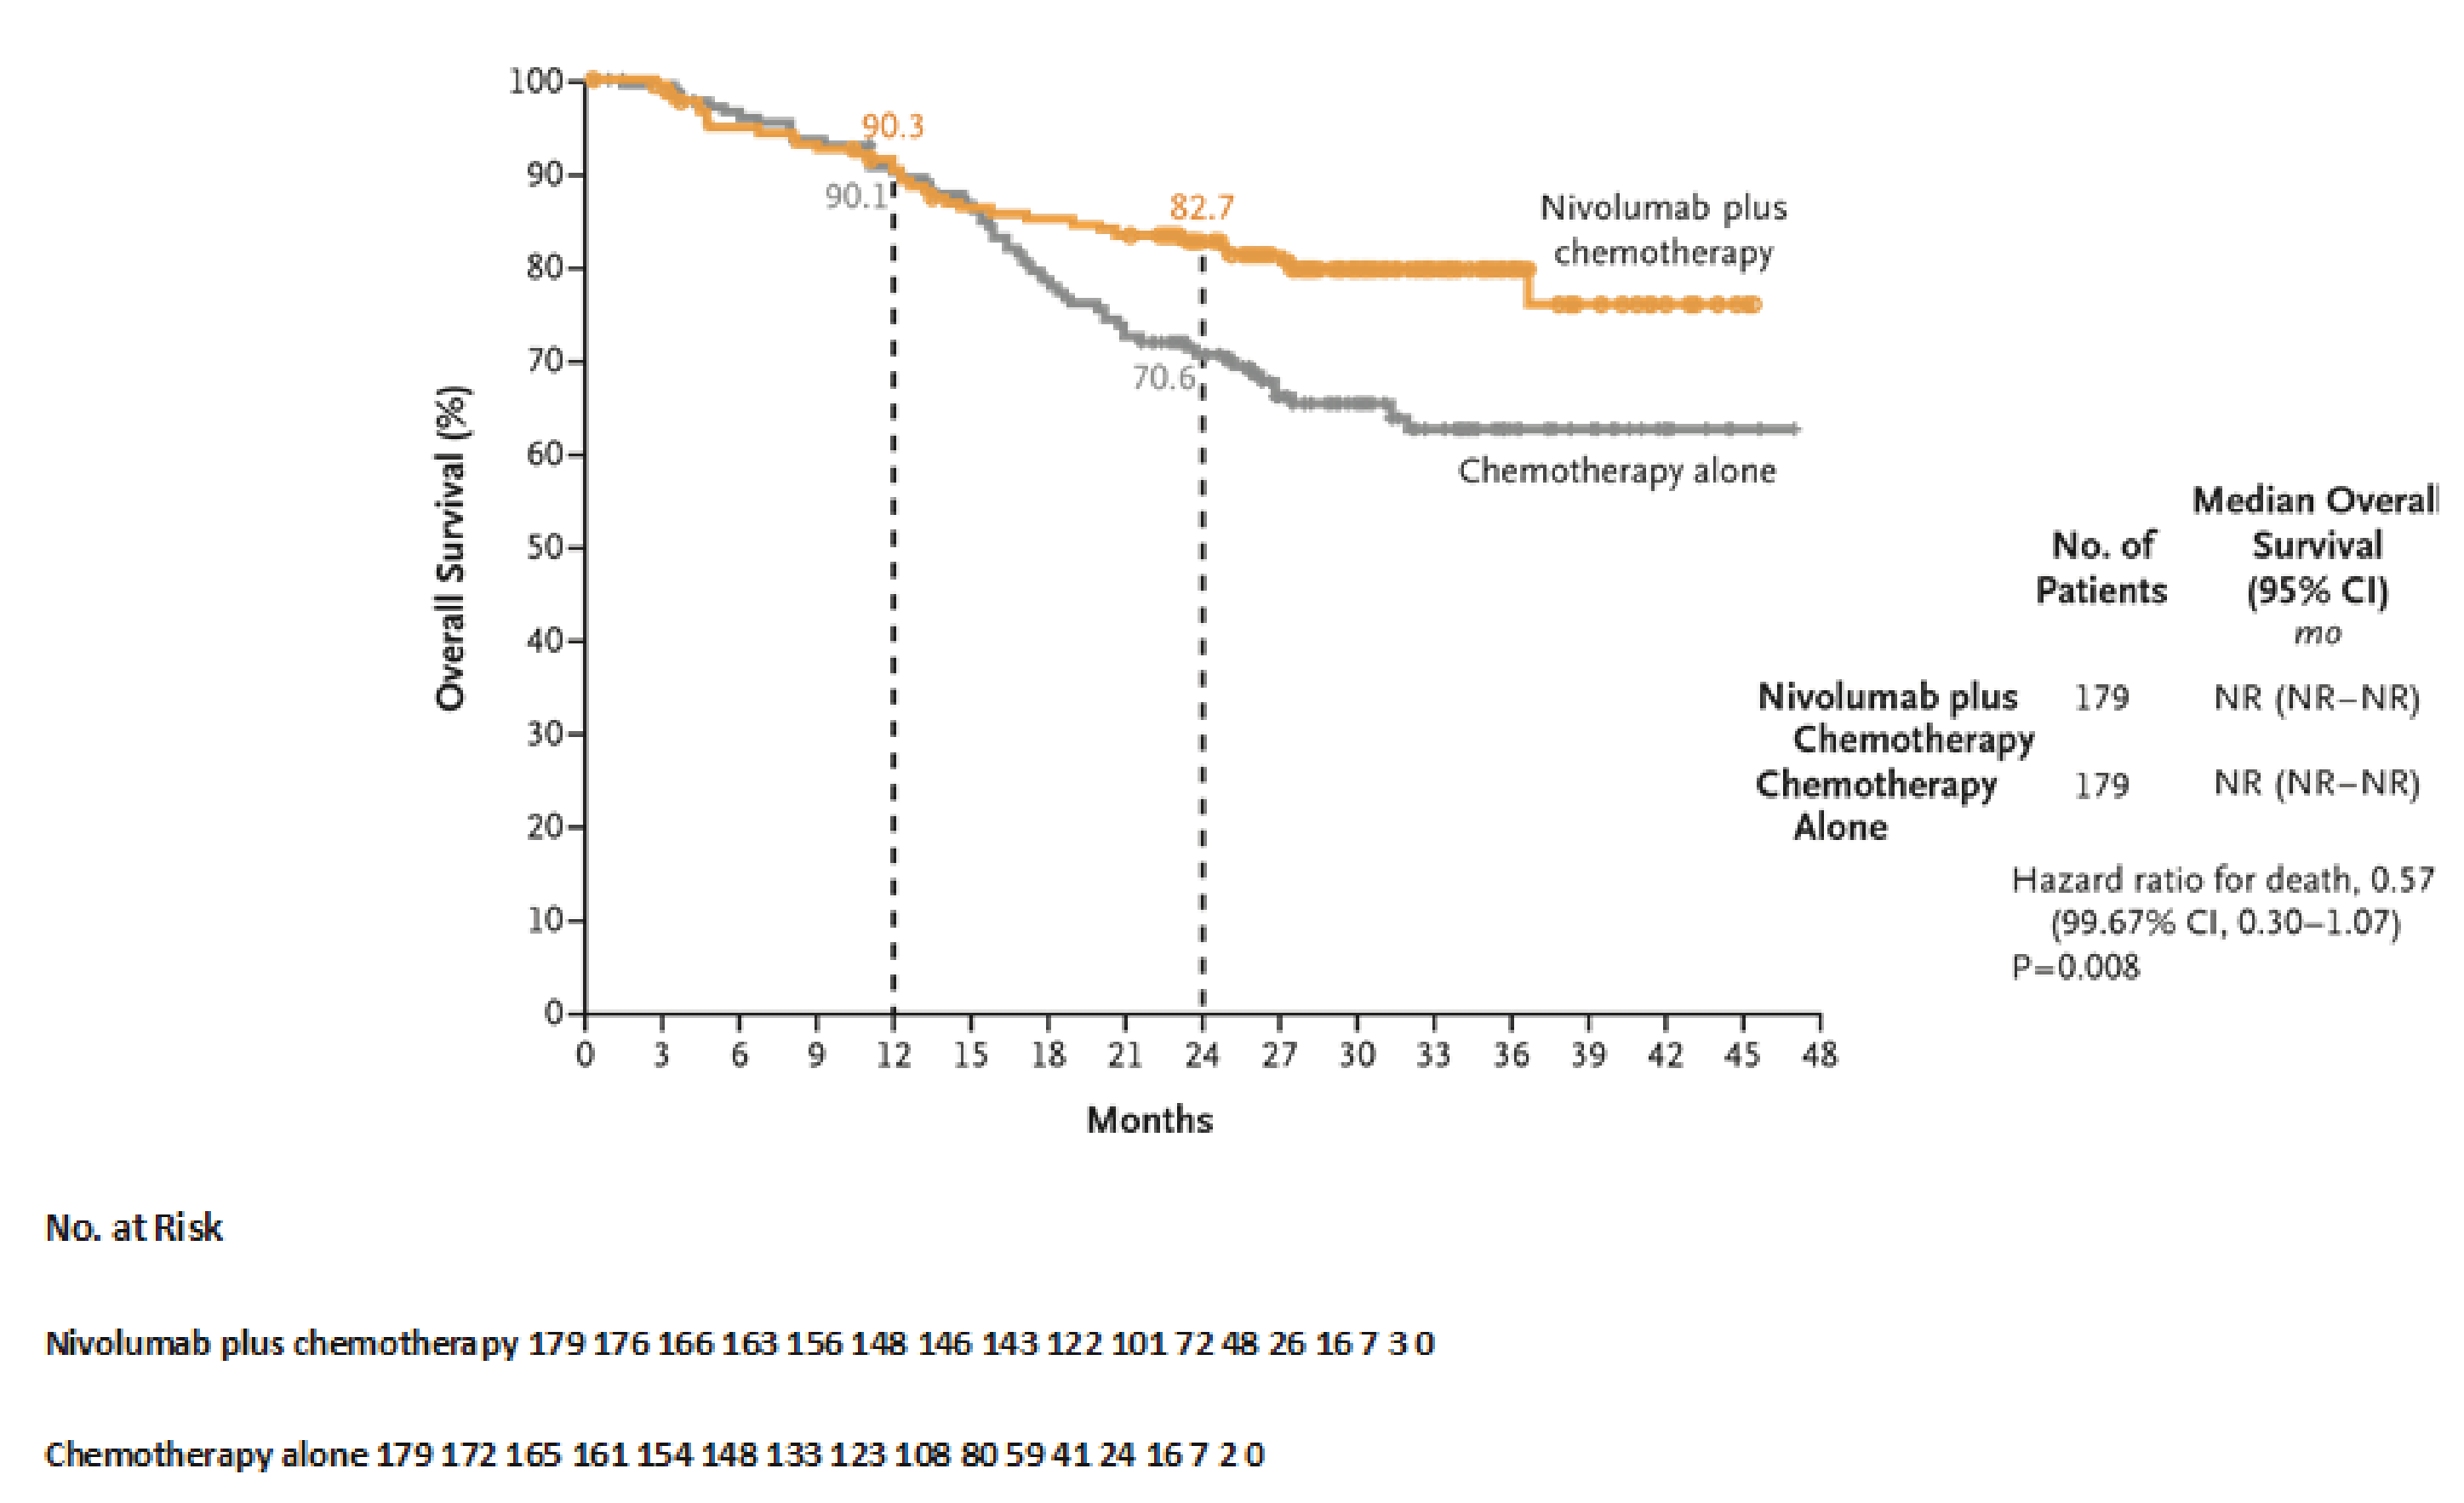 This figure shows the OS curves of the total number of at-risk patients from 0 to 48 months in the nivolumab plus chemotherapy and chemotherapy arms. Both curves cross at 15 months and remain diverged until month 48.